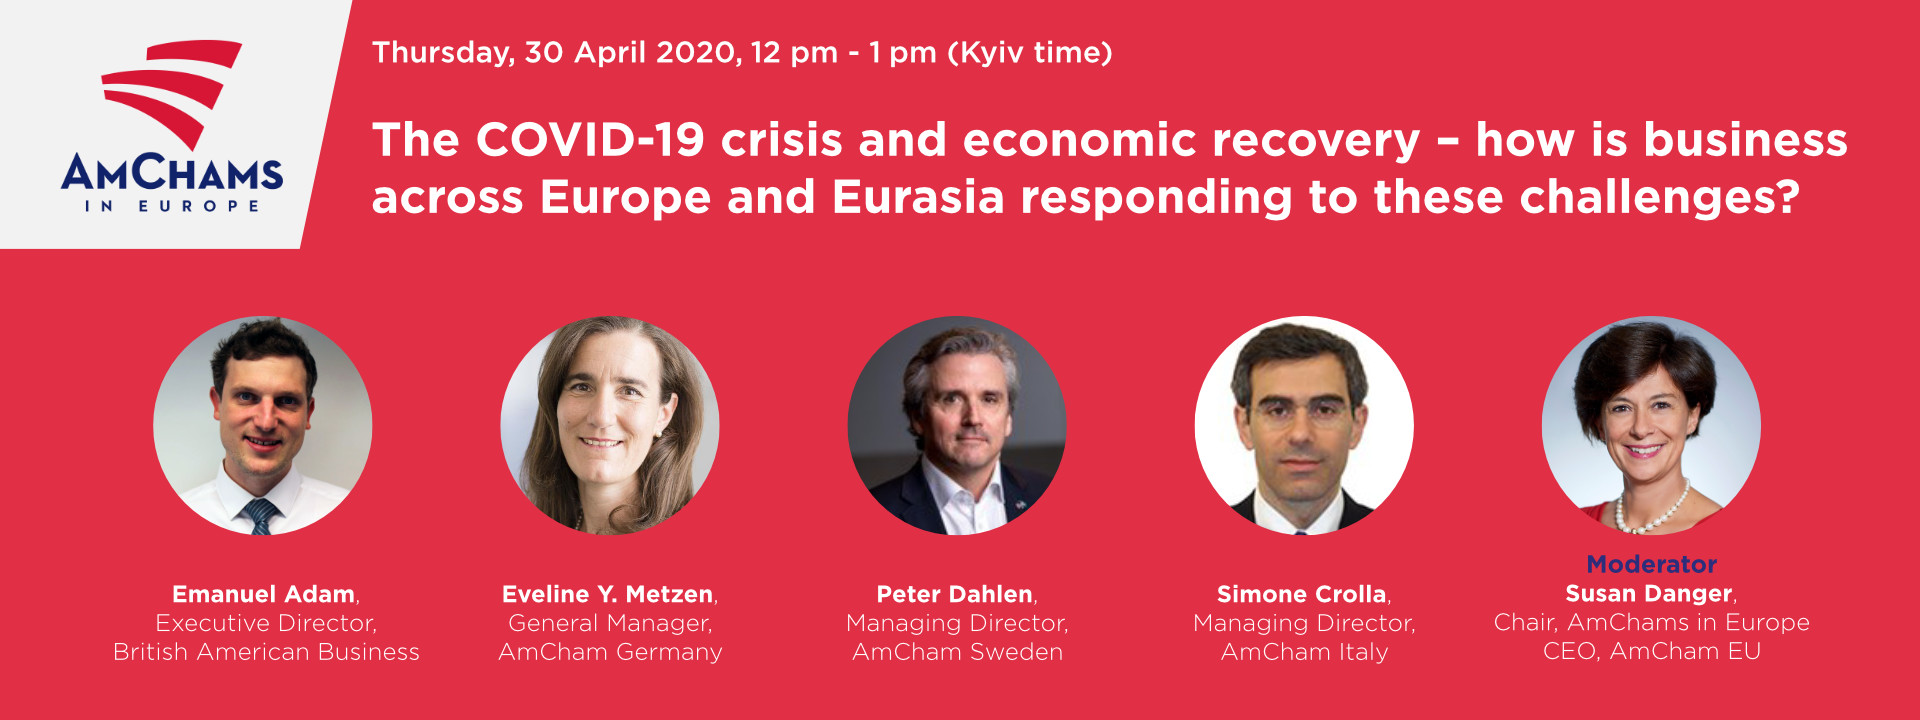 The COVID-19 crisis and economic recovery – how is business across Europe and Eurasia responding to these challenges?